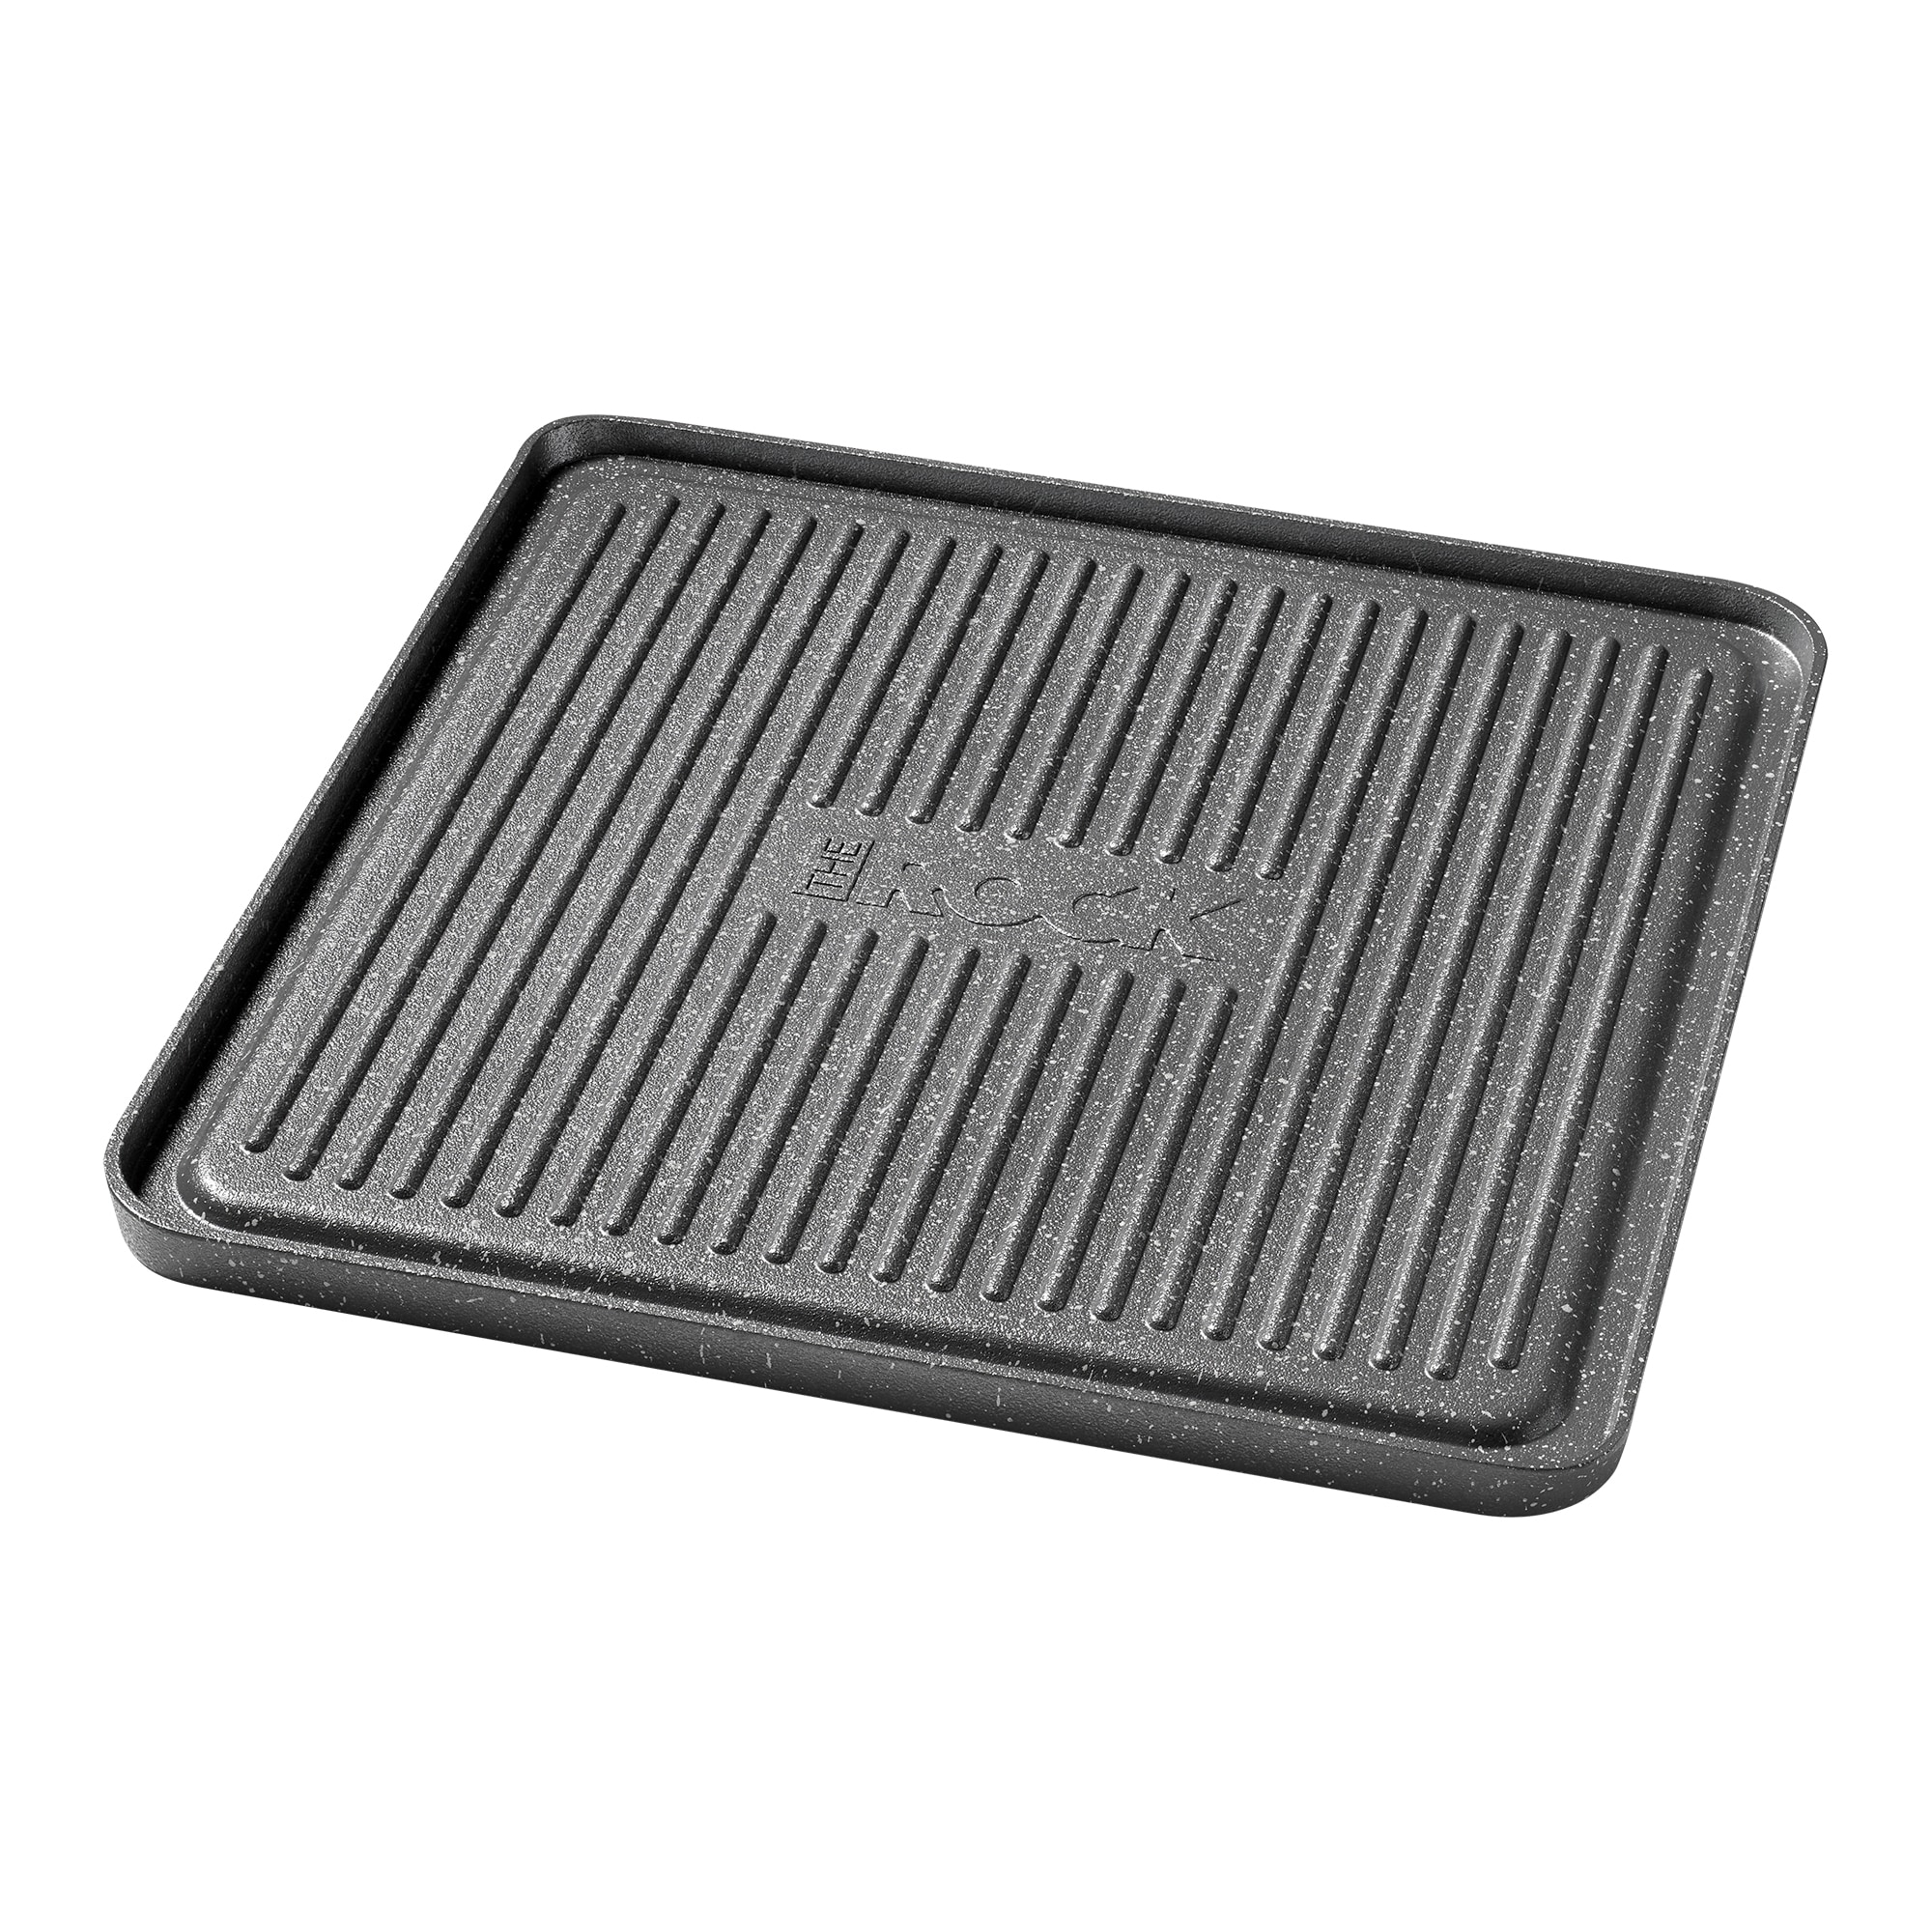 NEW The Rock Pro reversible grill/griddle by @starfrit has arrived